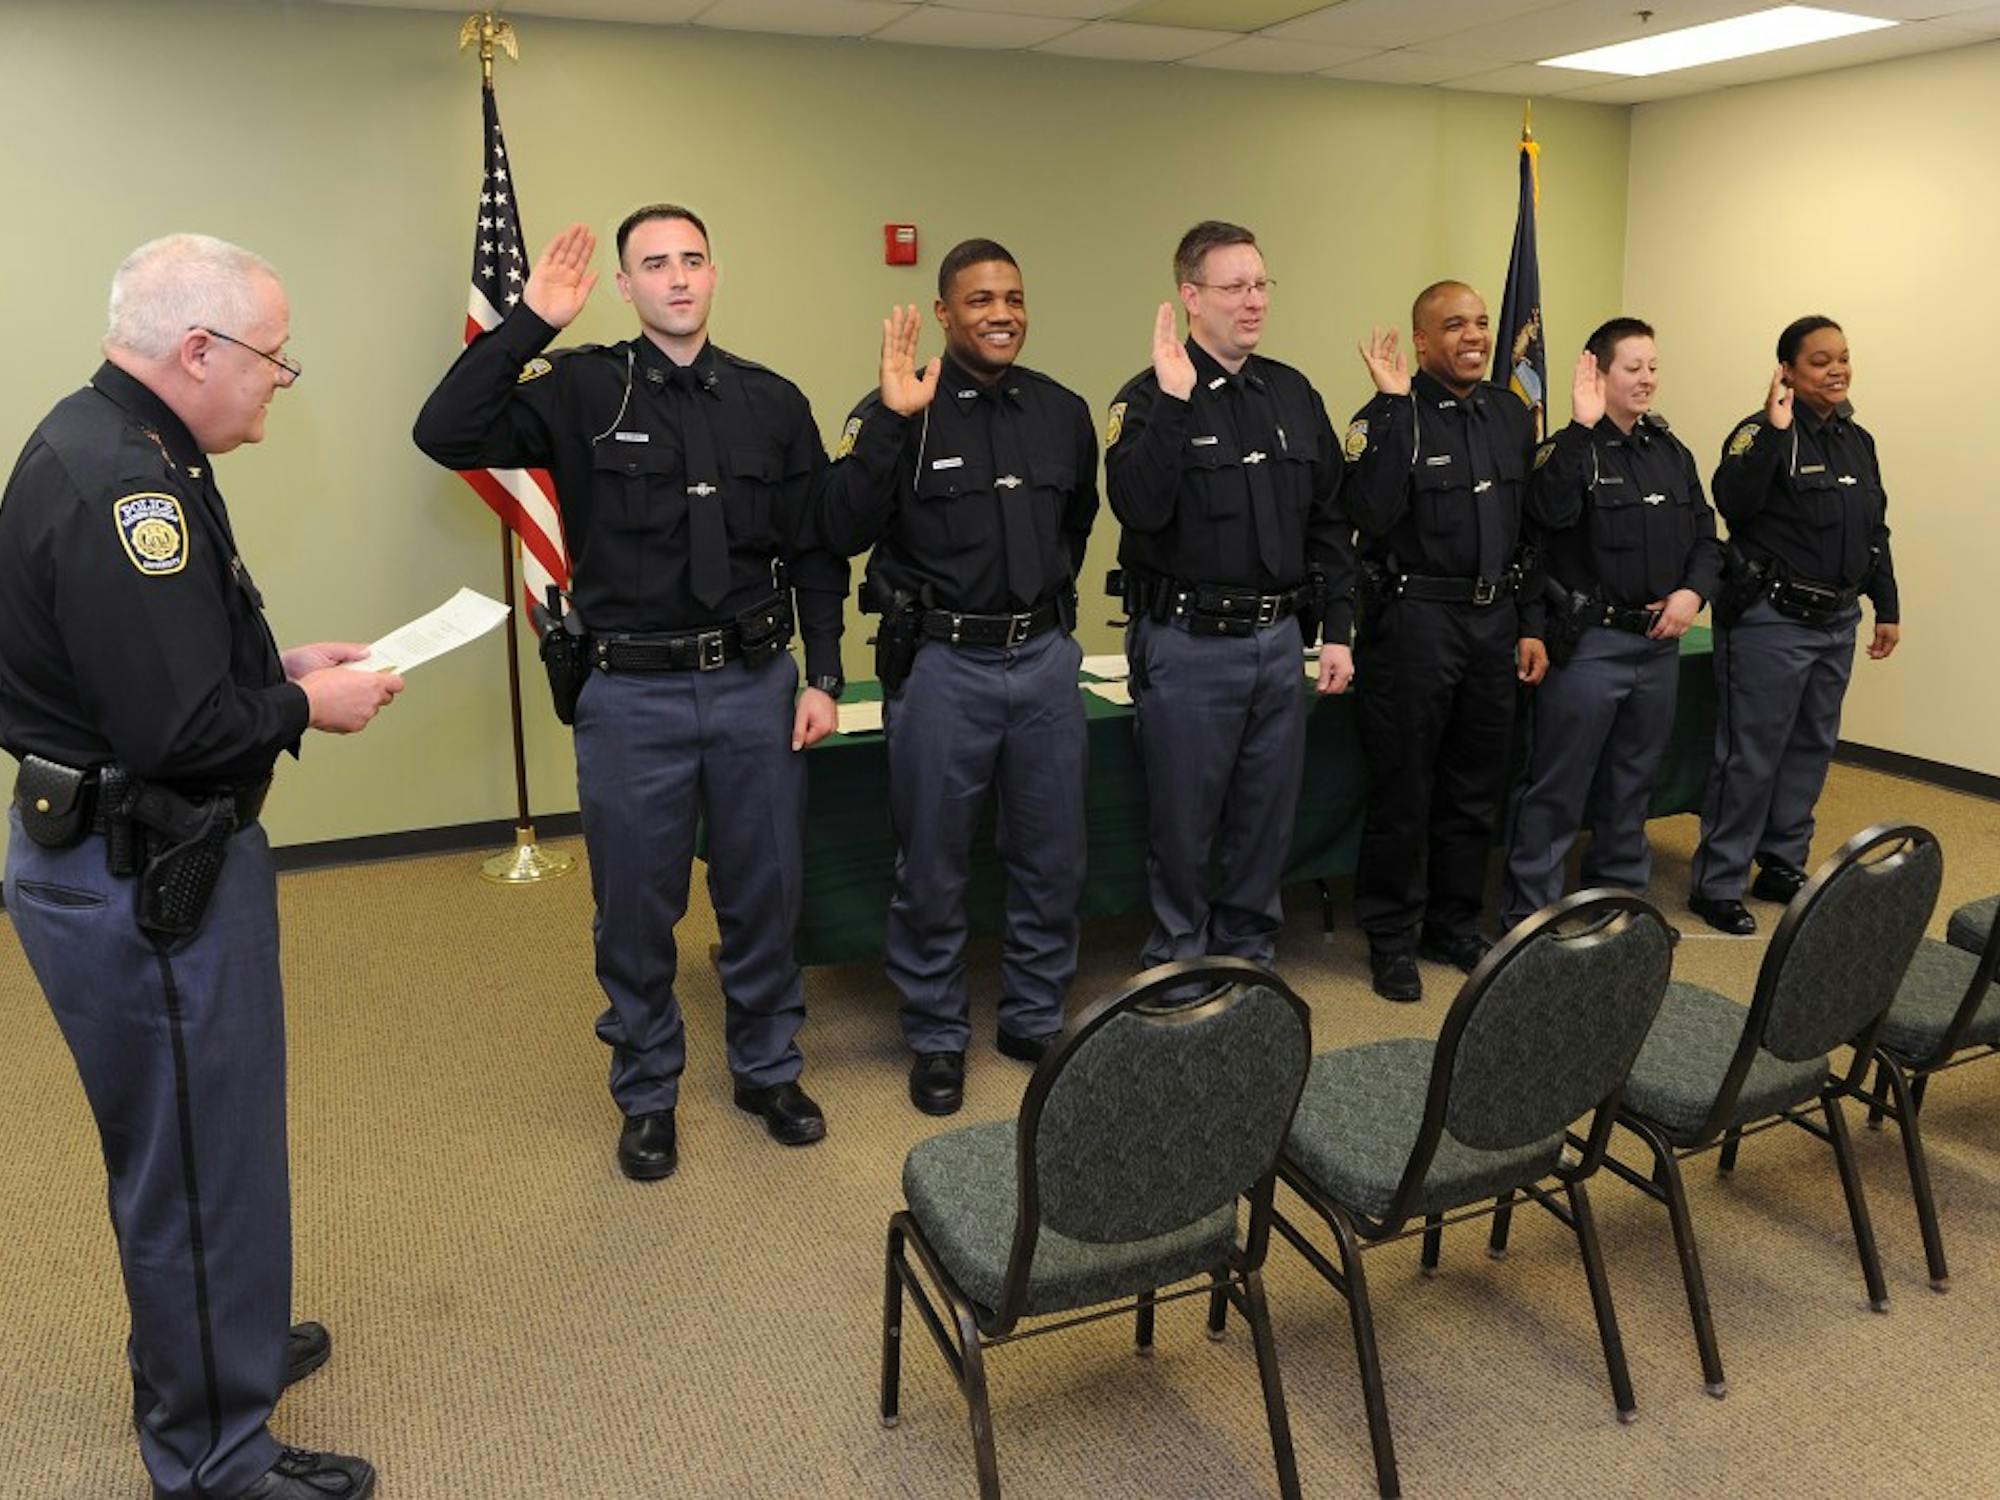 EMU Cheif Heighes swears in 6 new officers.